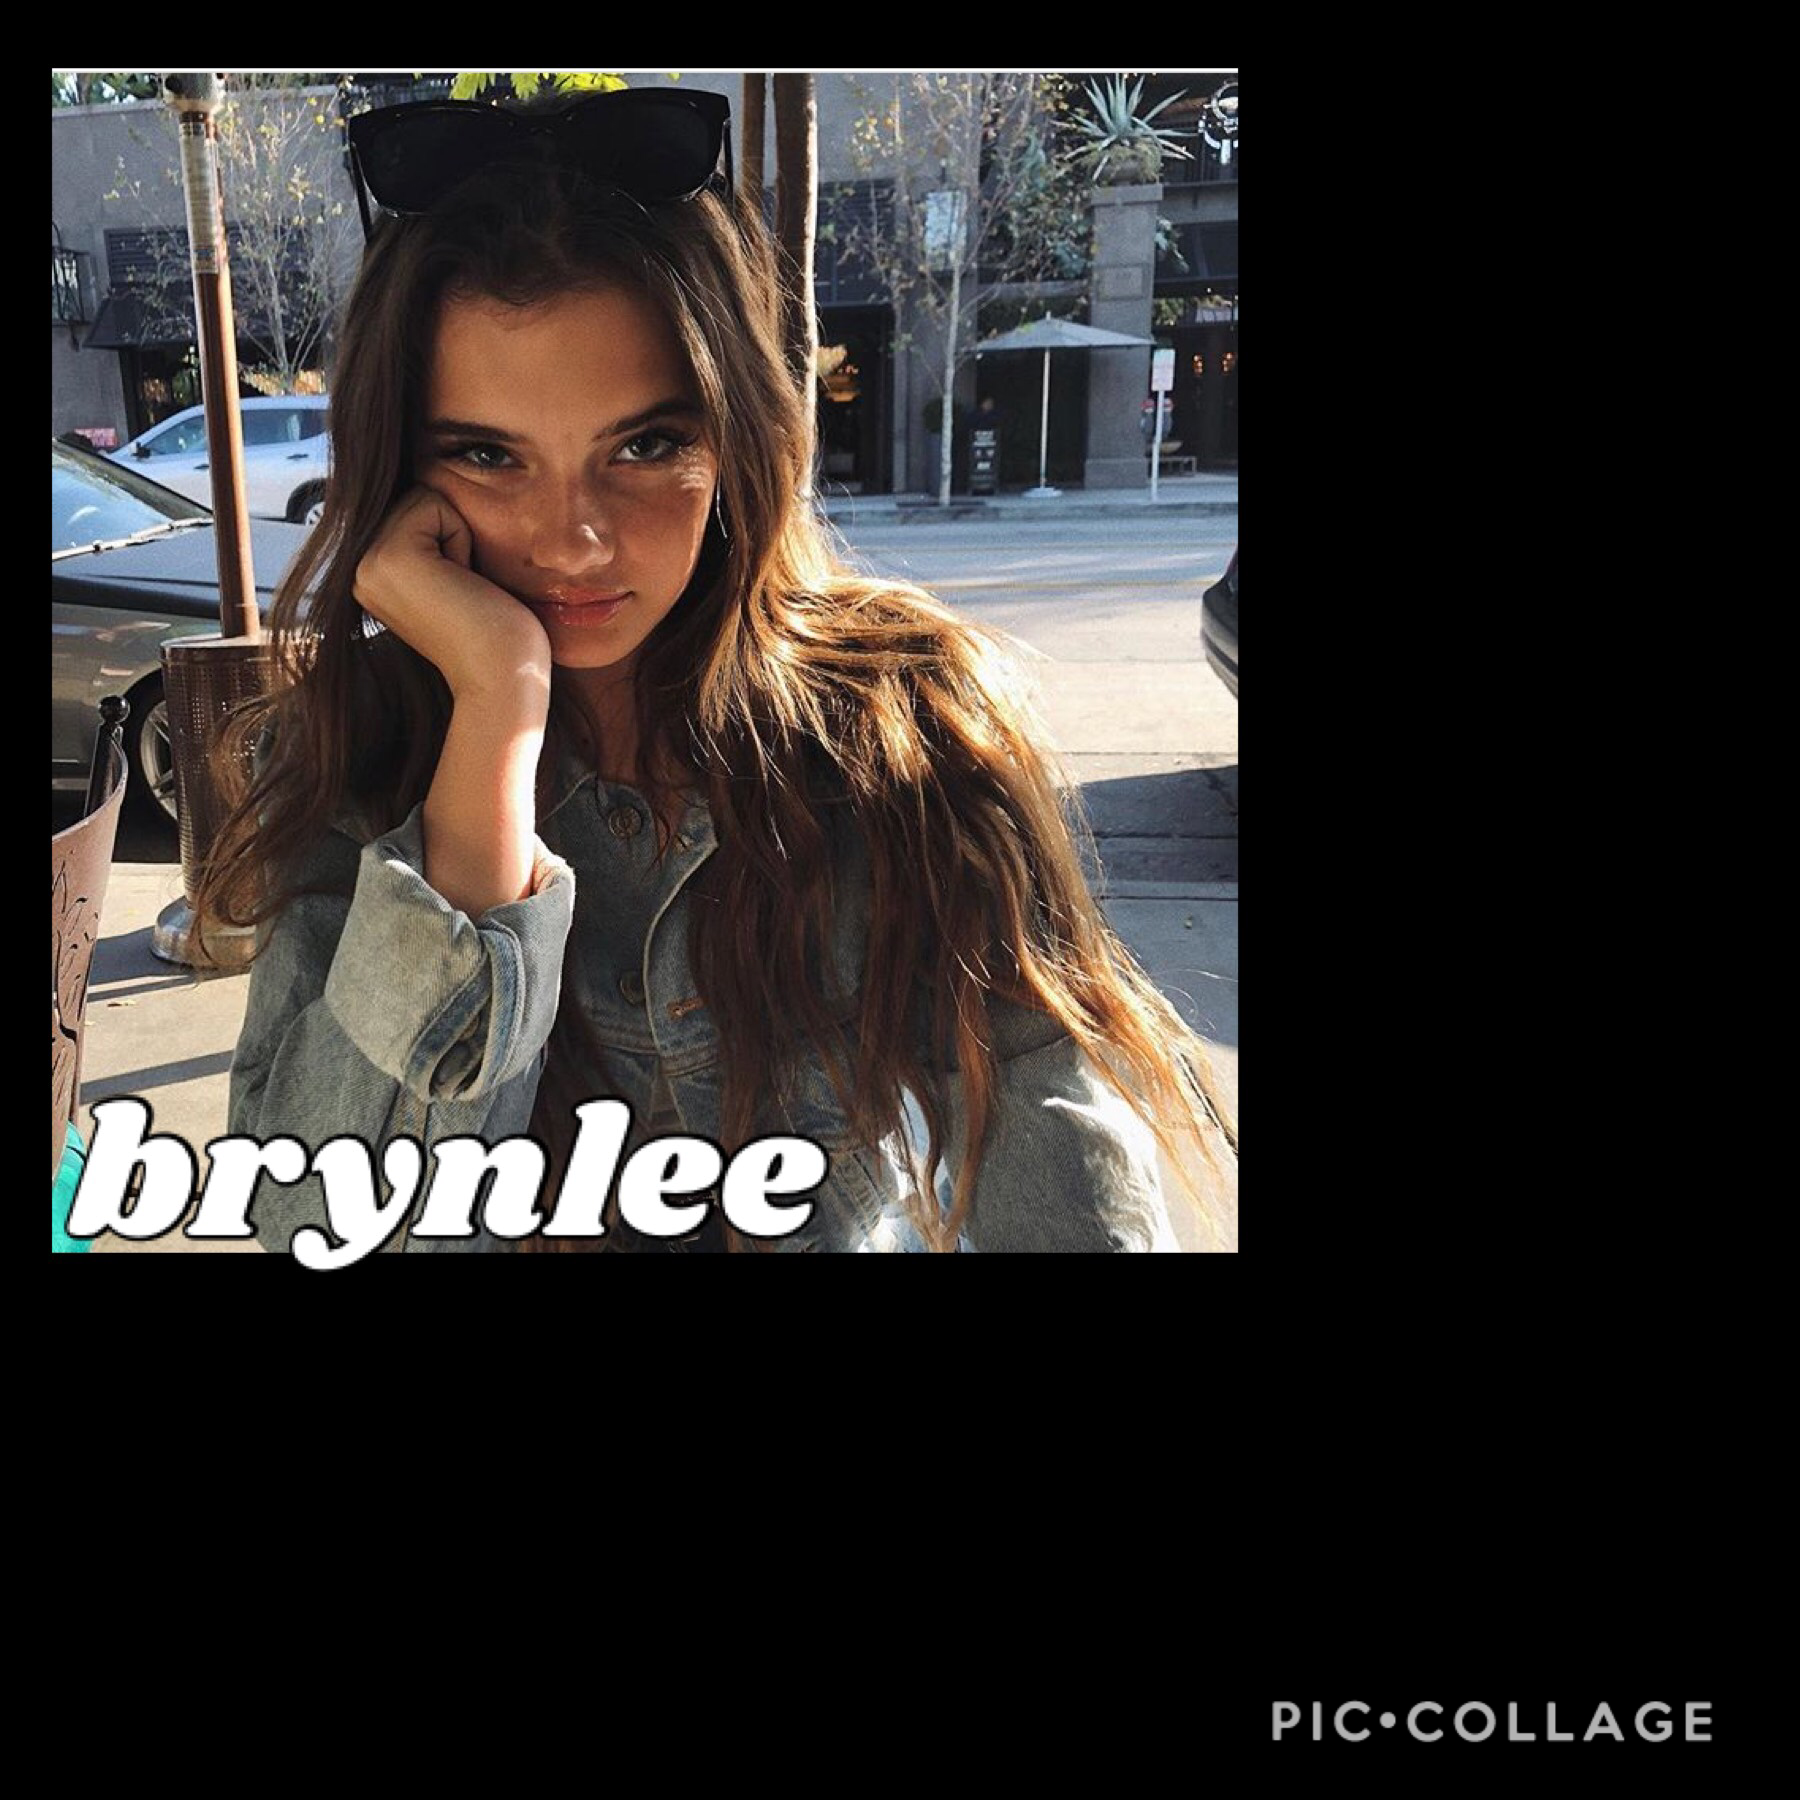 tap for bio

brynlee🤠
goes by bryn
mentally 2🤪
uses emojis like an 8 year old but it’s all a joke🤩🤩